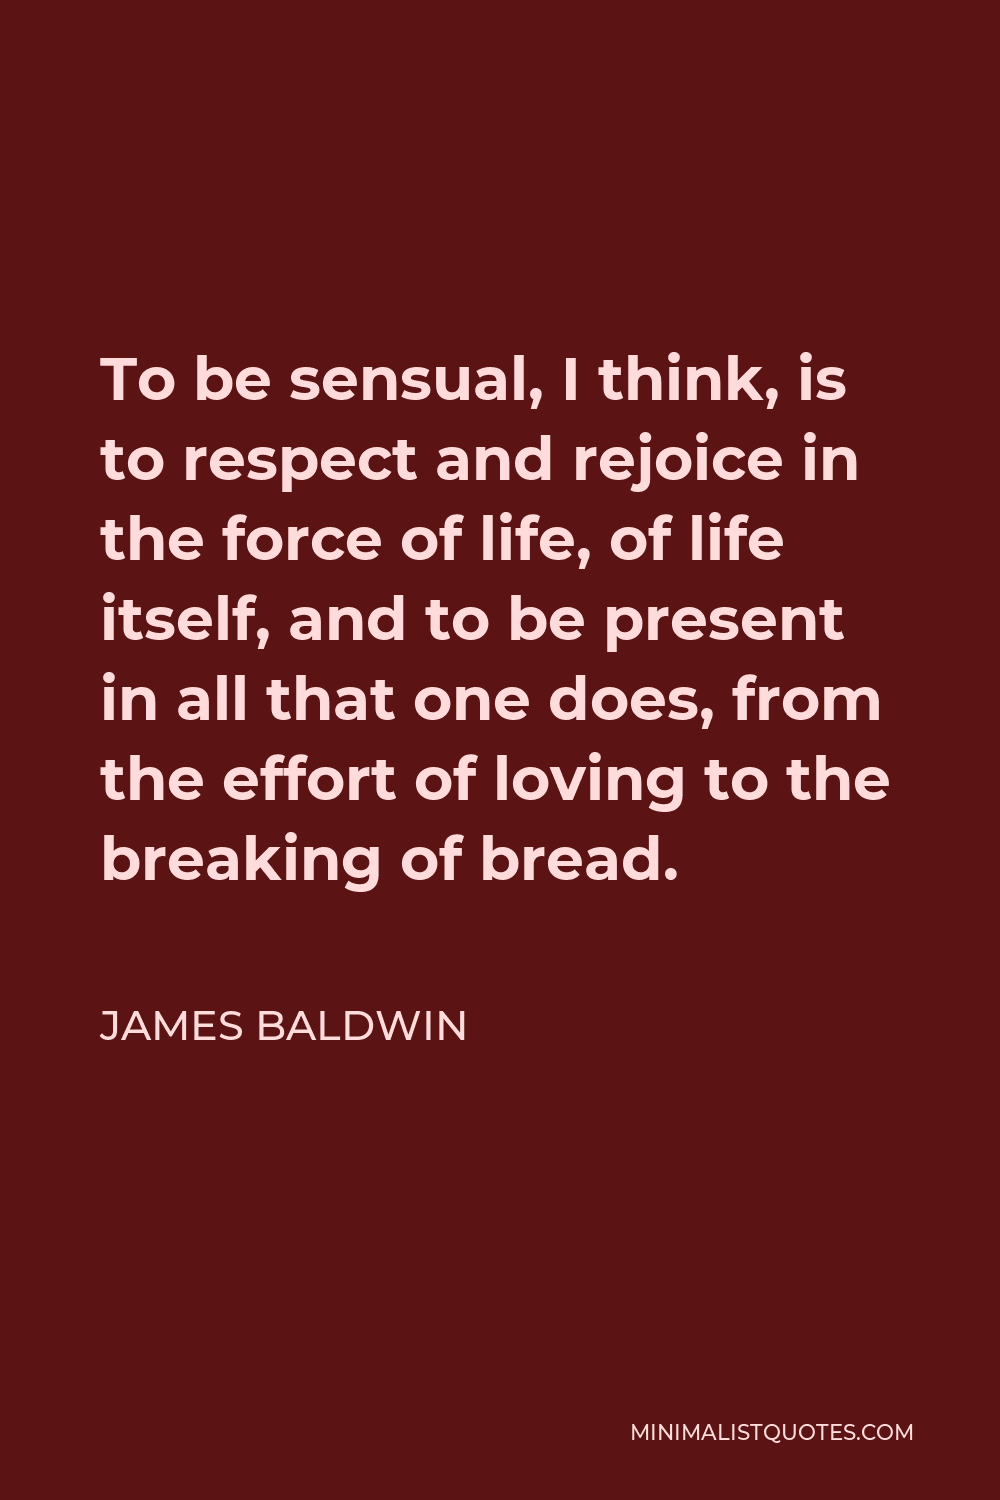 James Baldwin Quote - To be sensual, I think, is to respect and rejoice in the force of life, of life itself, and to be present in all that one does, from the effort of loving to the breaking of bread.